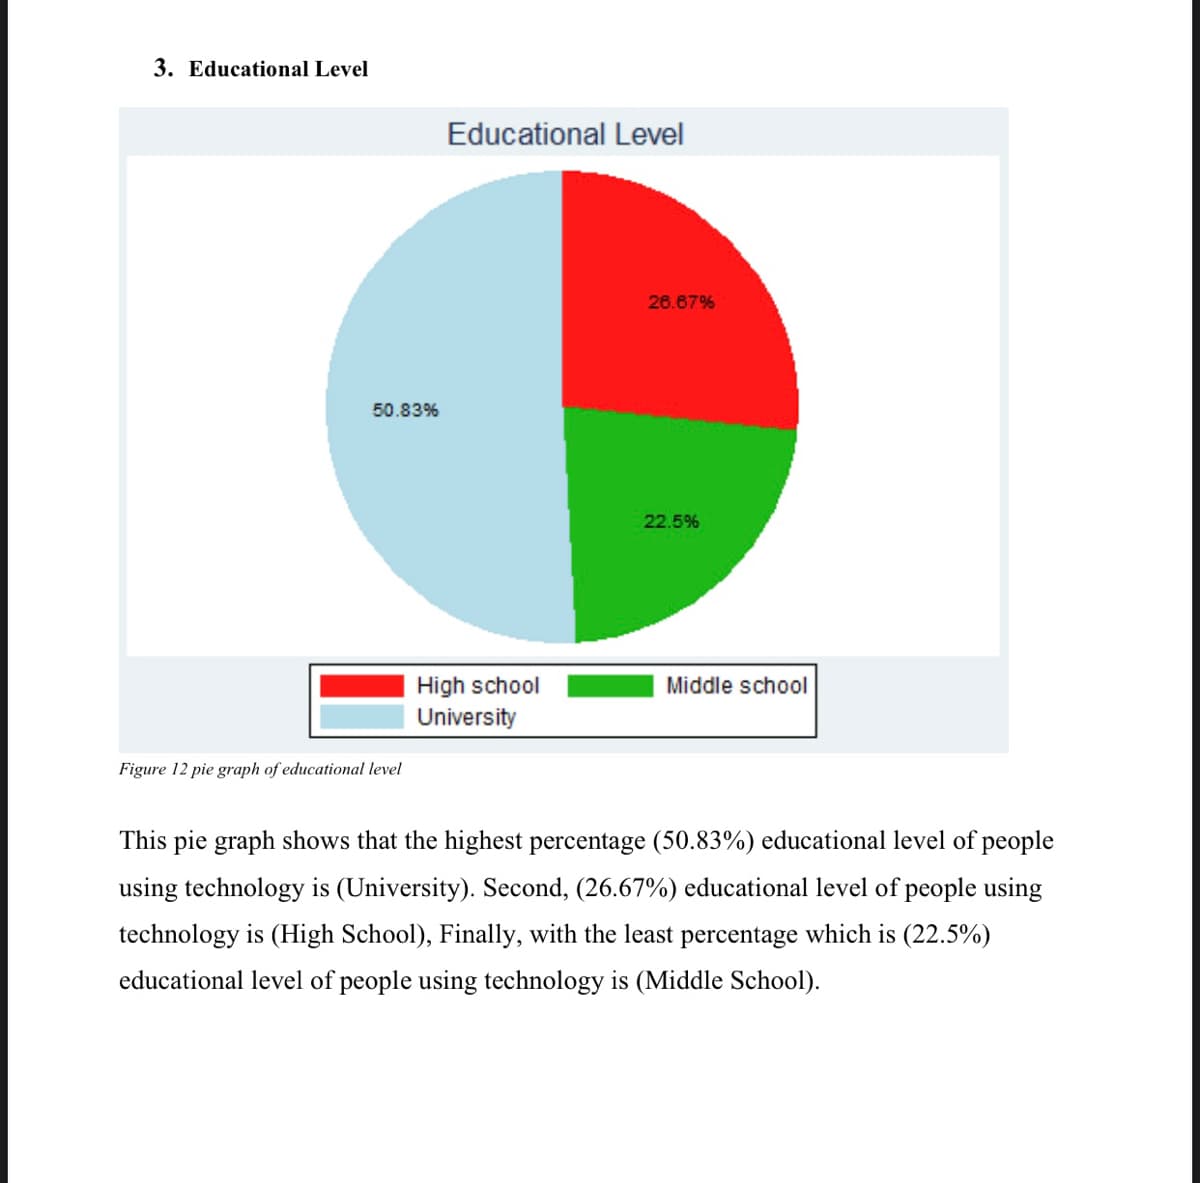 3. Educational Level
Educational Level
26.87%
50.83%
22.5%
High school
University
Middle school
Figure 12 pie graph of educational level
This pie graph shows that the highest percentage (50.83%) educational level of people
using technology is (University). Second, (26.67%) educational level of people using
technology is (High School), Finally, with the least percentage which is (22.5%)
educational level of people using technology is (Middle School).
